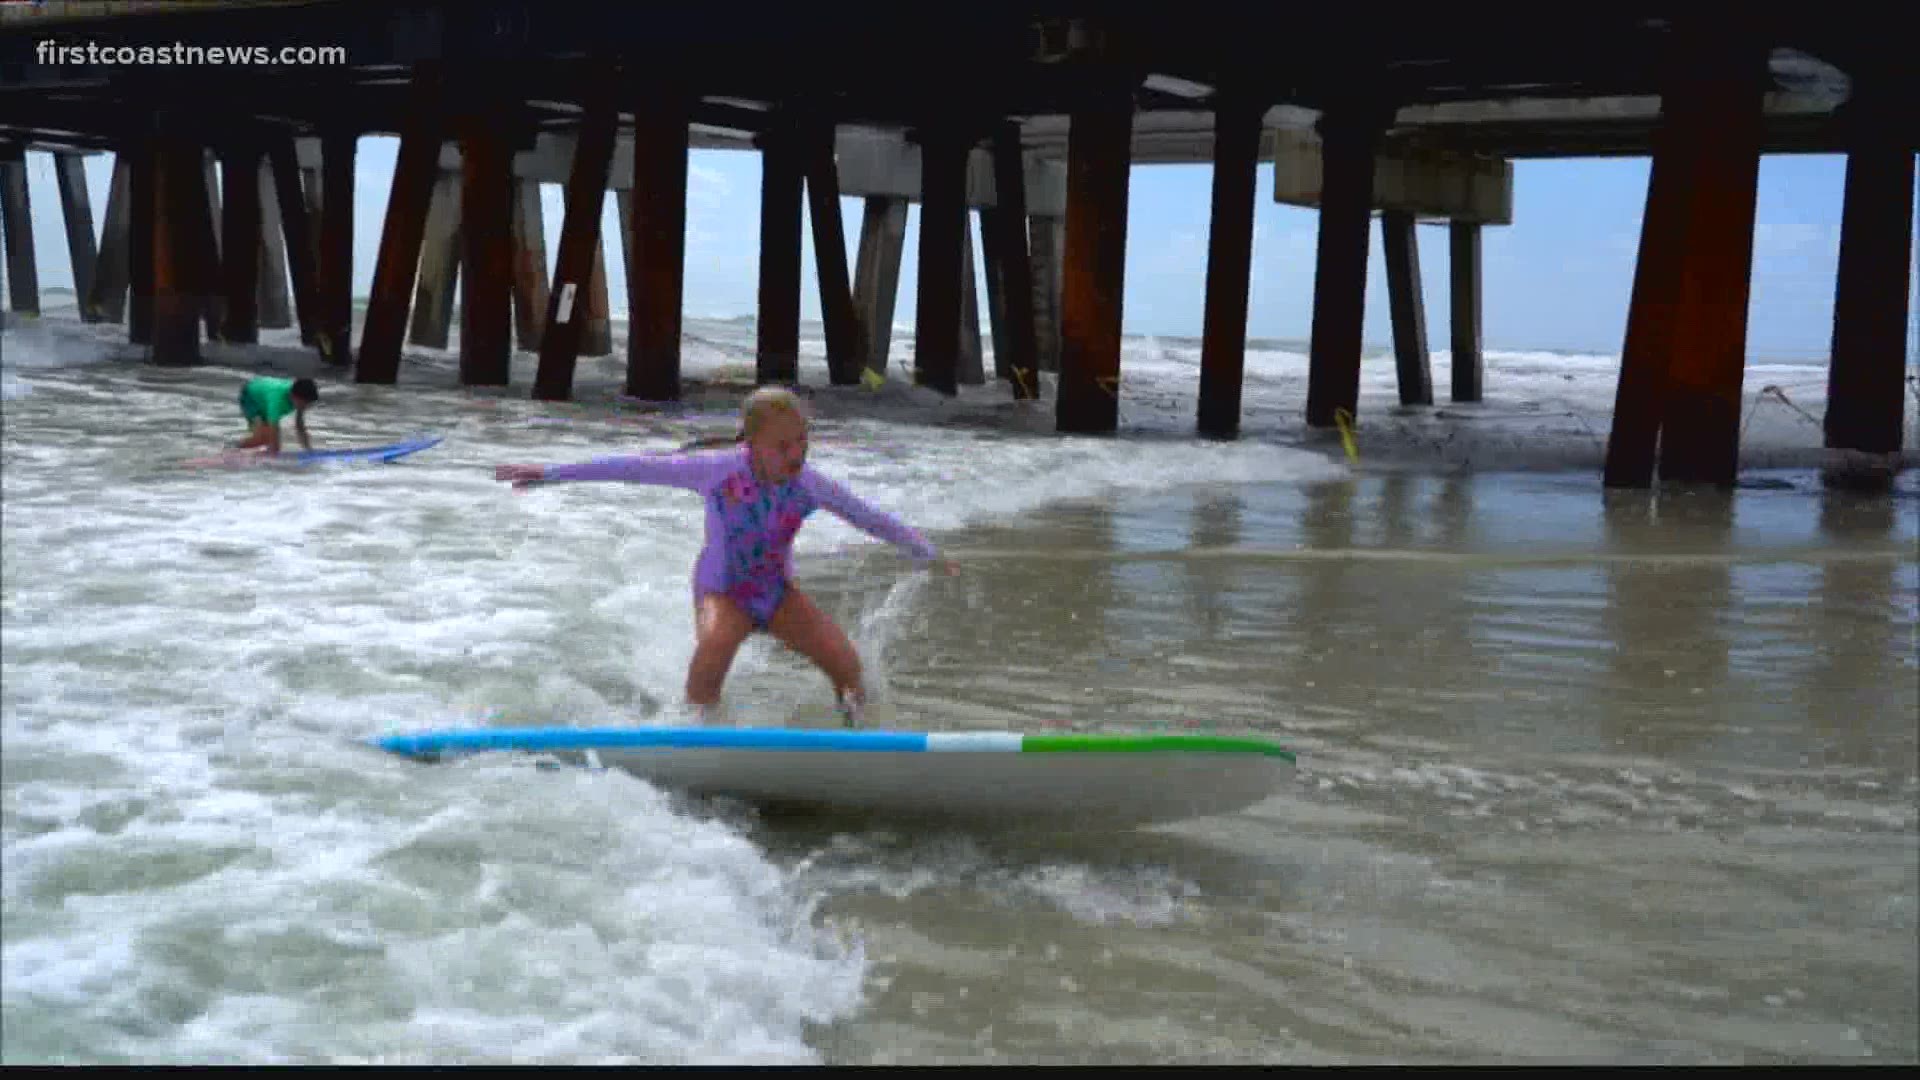 Surfing is one of four sports making an Olympic debut during Tokyo 2020 and Jacksonville Olympic hopefuls are hooked.